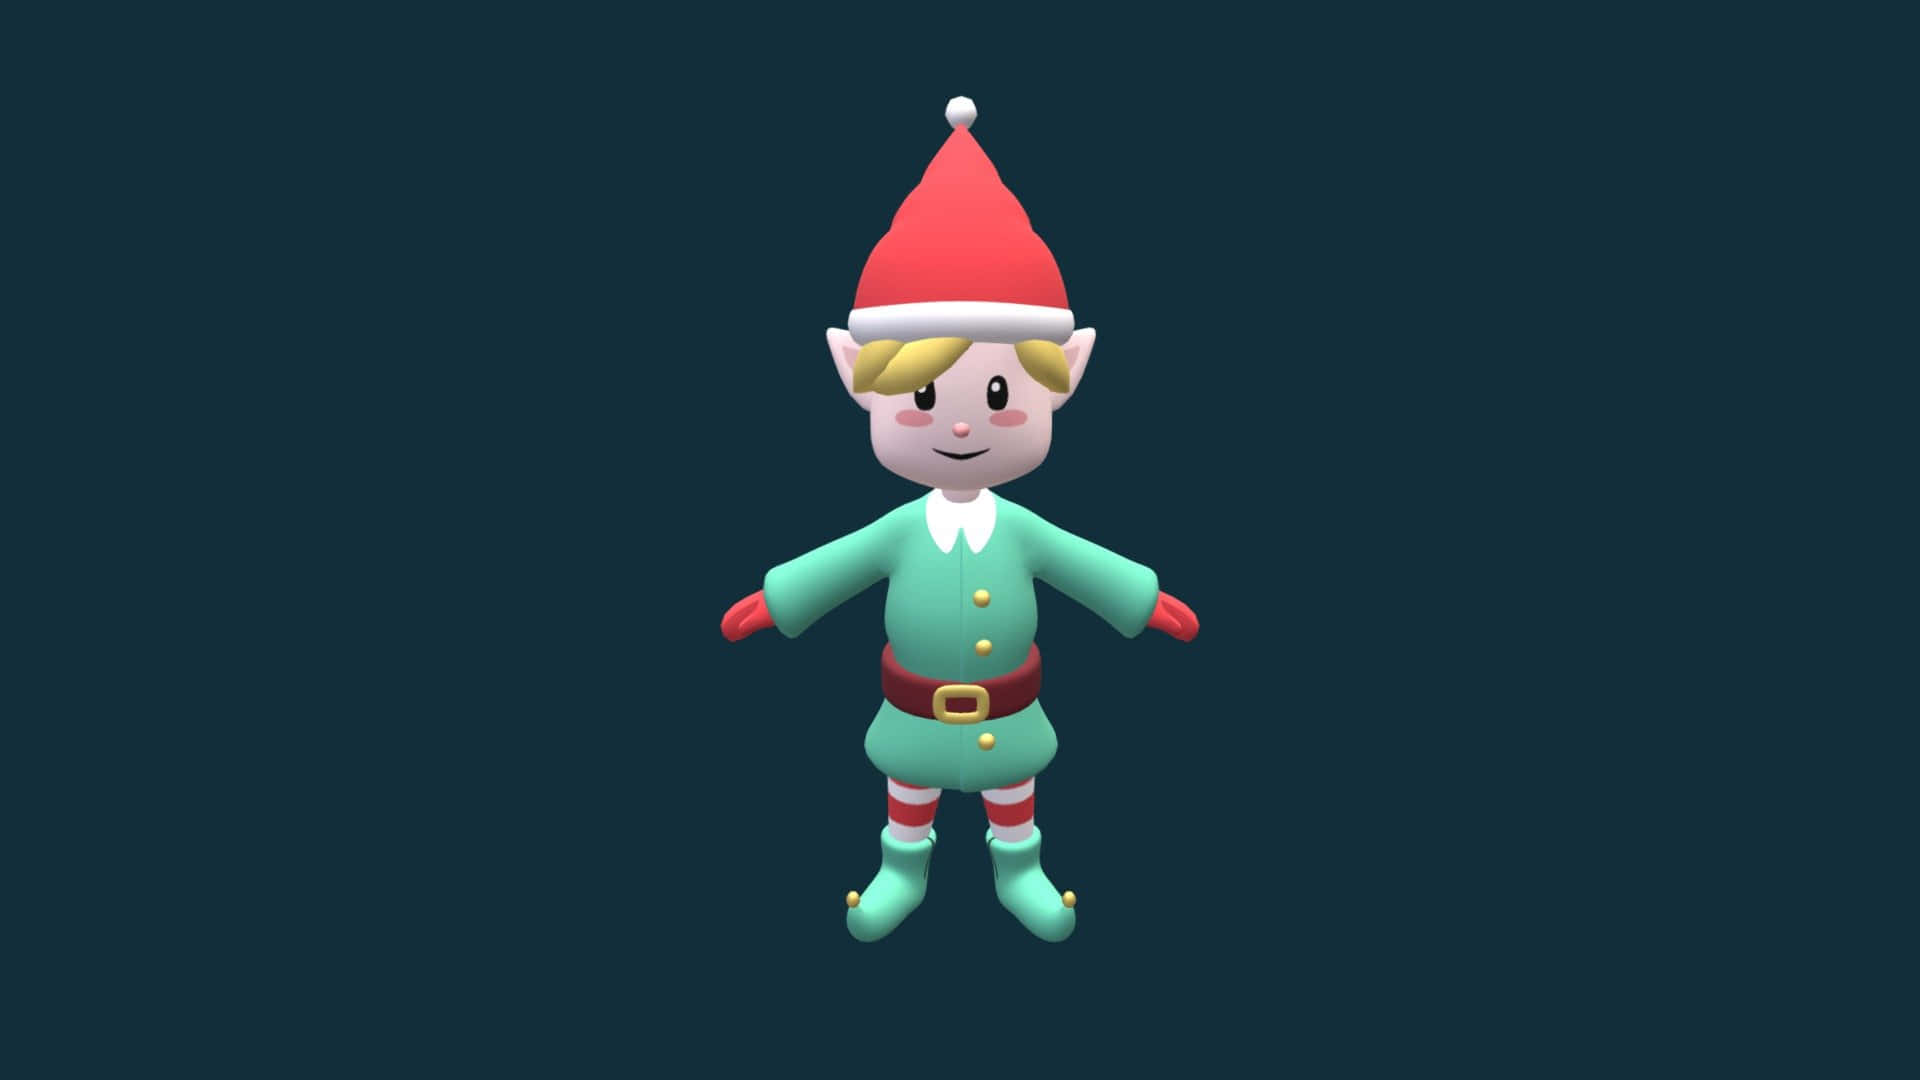 A 3d Model Of An Elf In A Green Hat